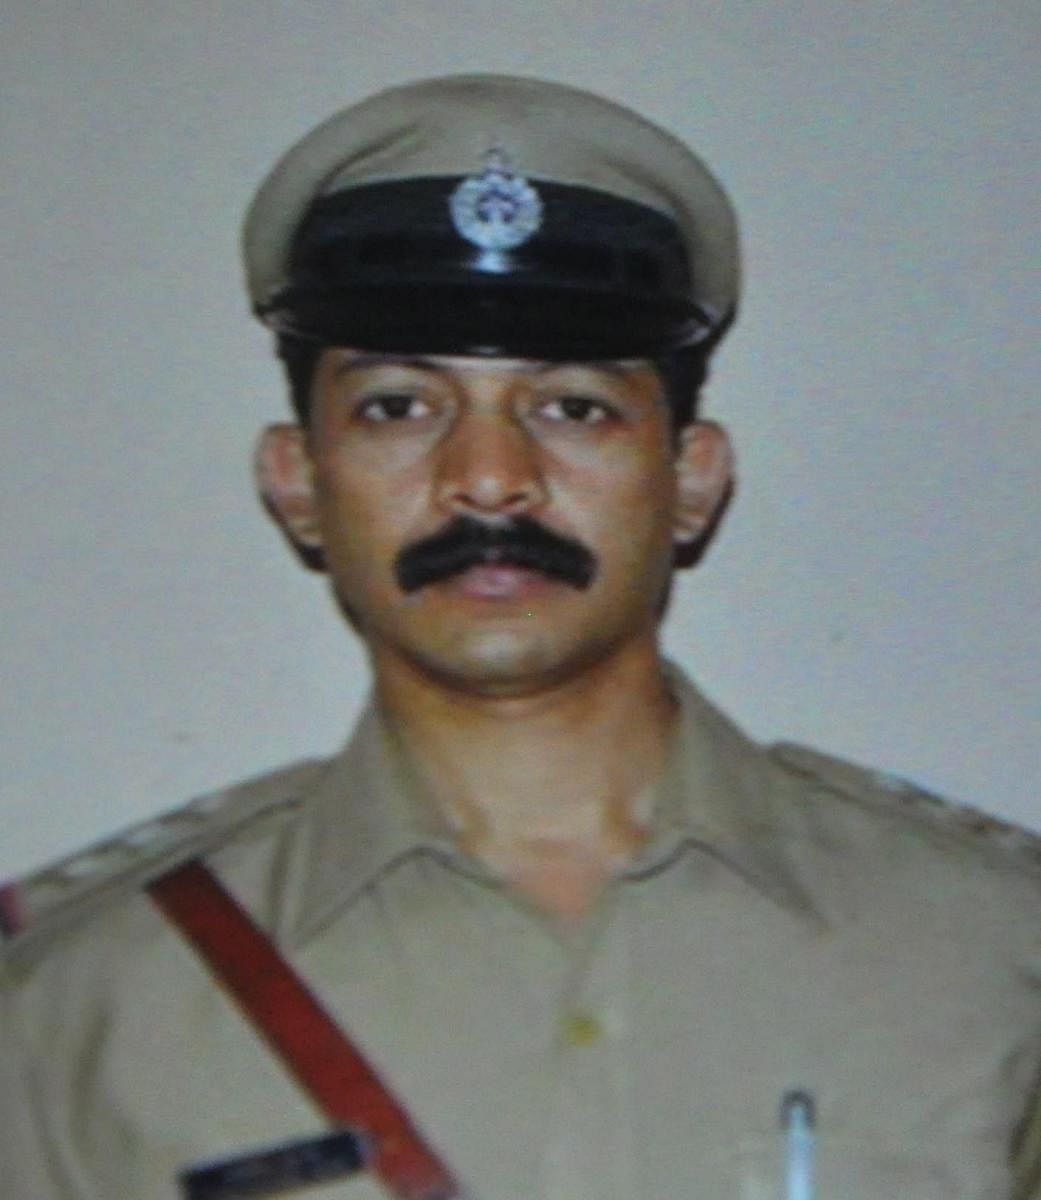 DySP death: ‘Previous govt did not cooperate with CBI’